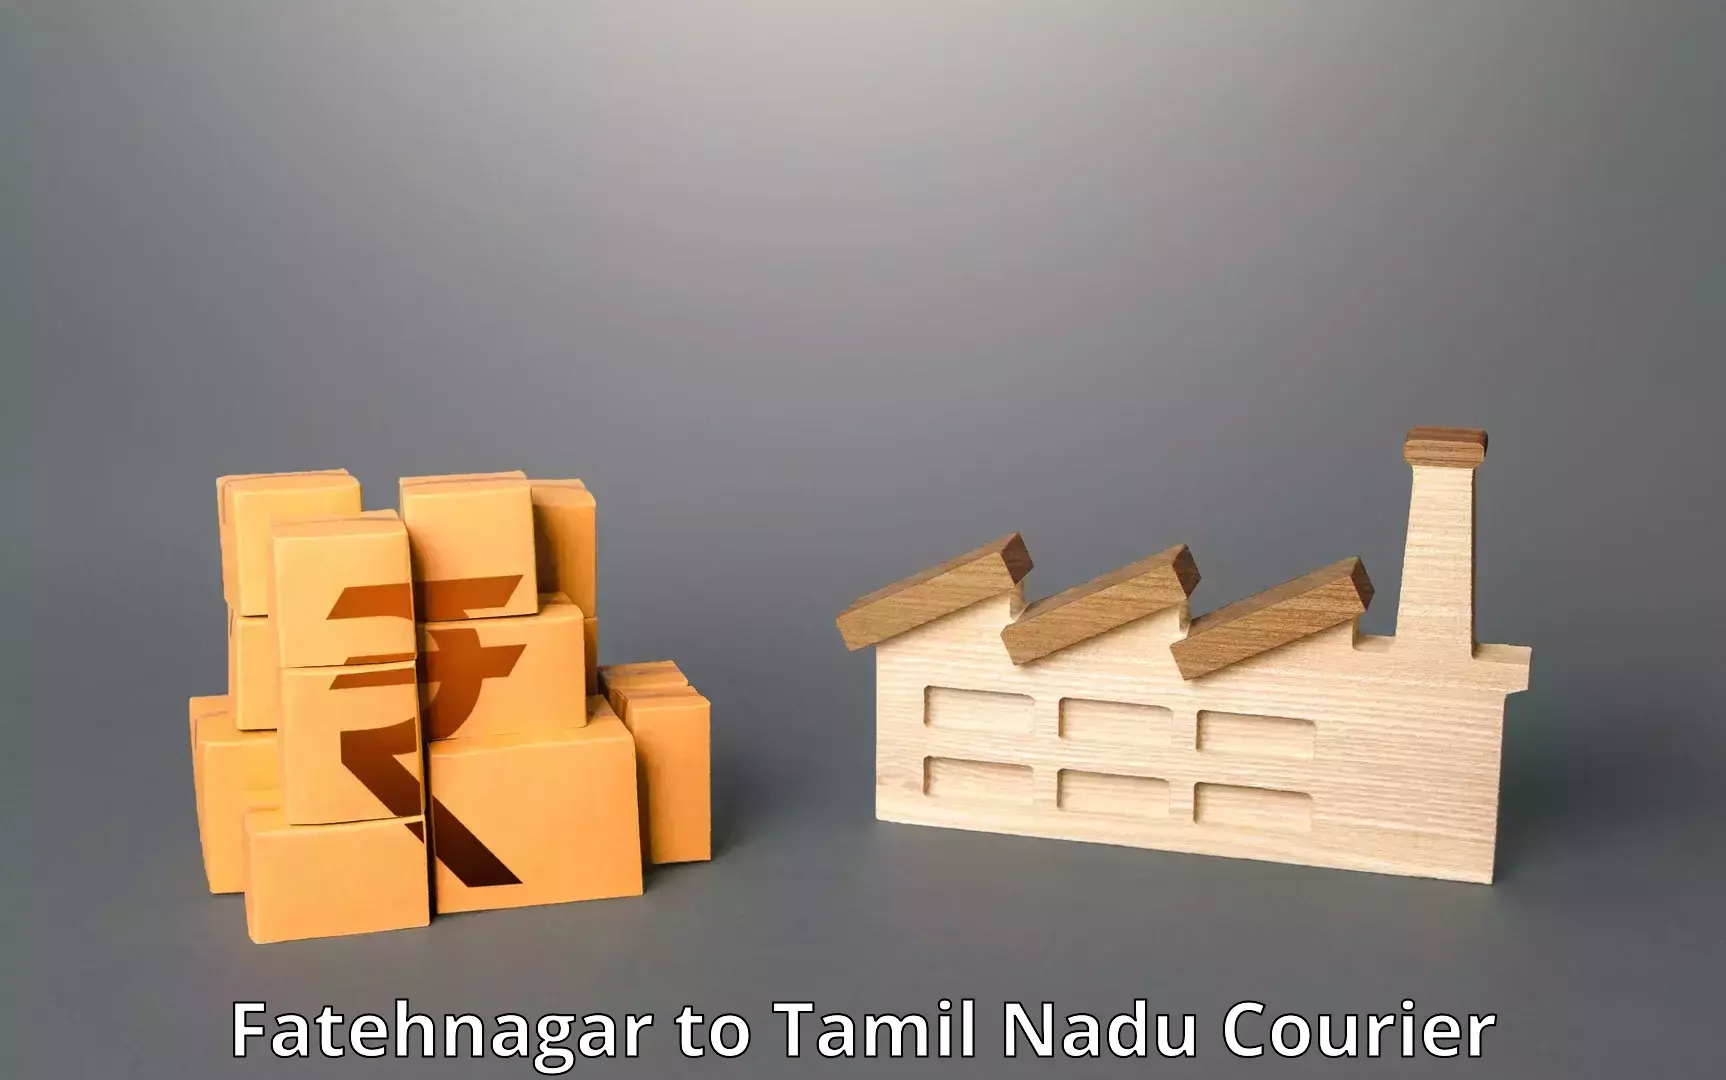 Streamlined delivery processes Fatehnagar to Chennai Port